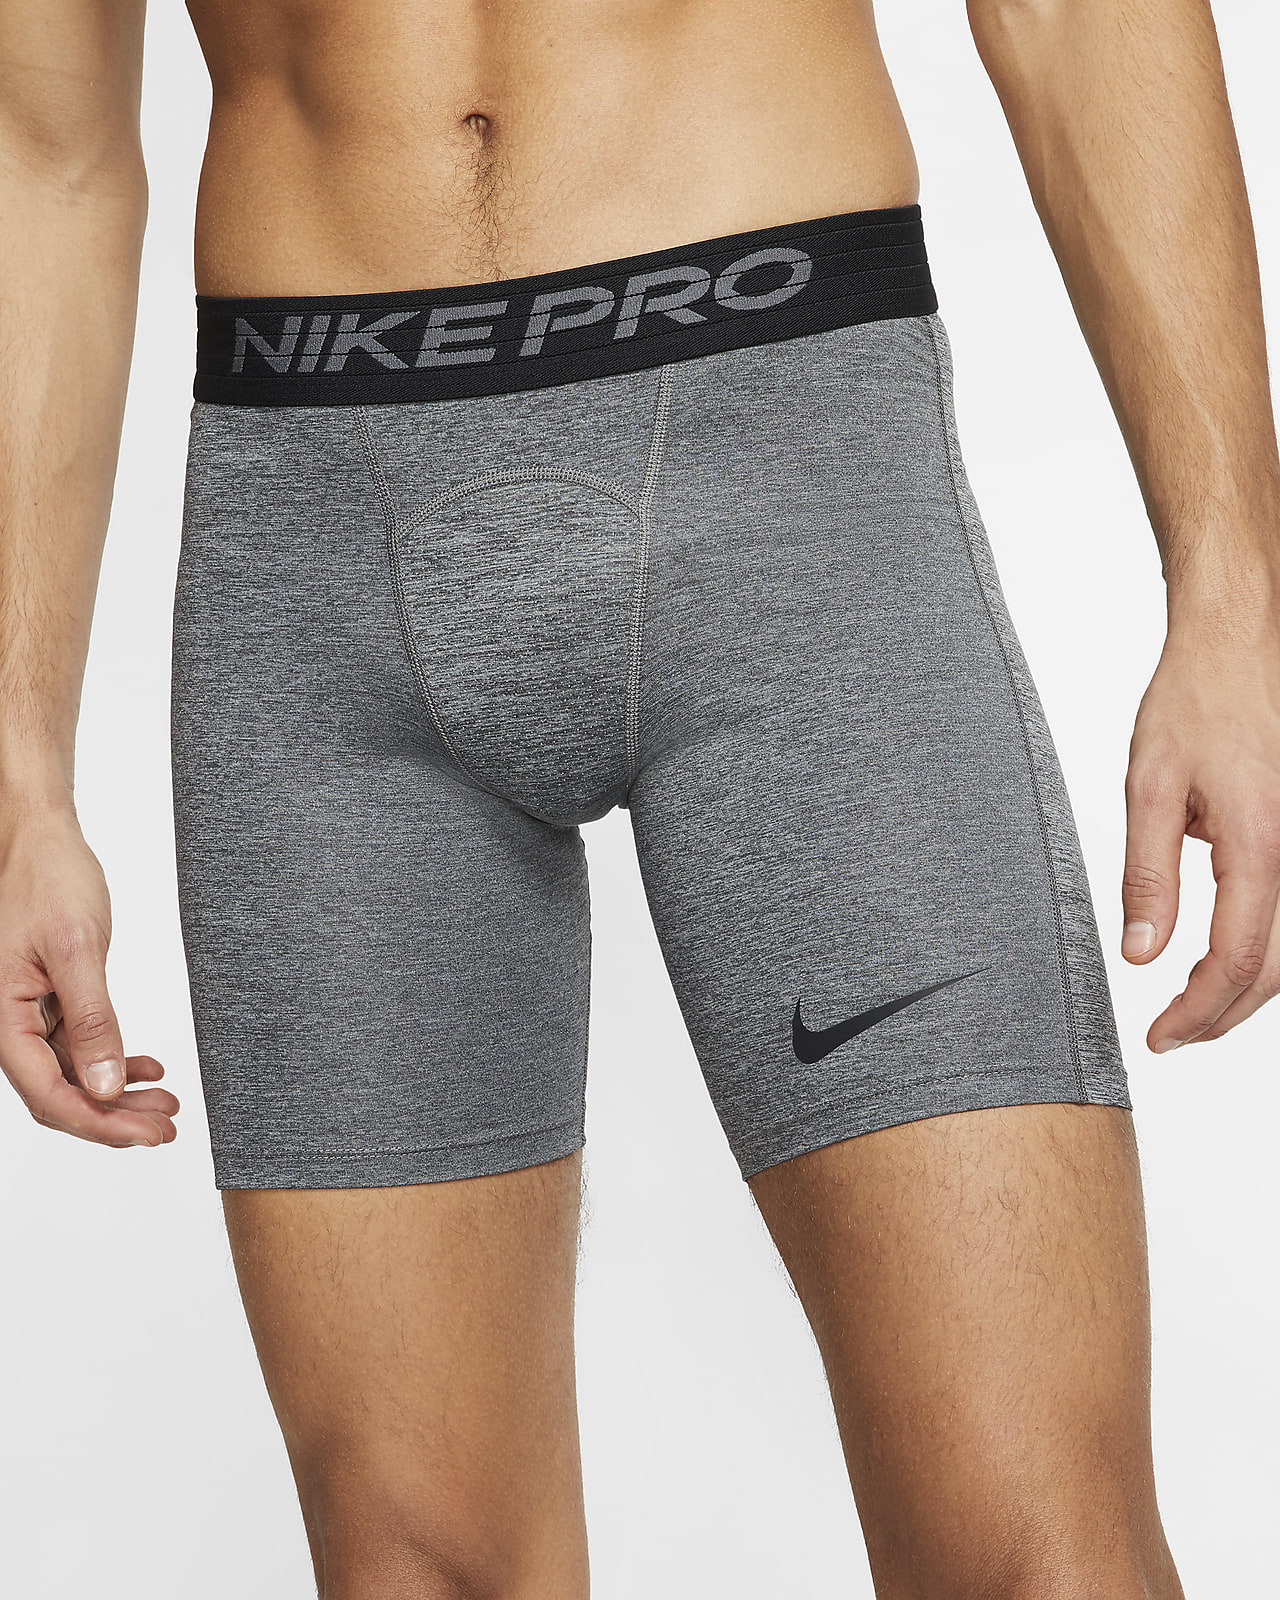 nike built in compression shorts